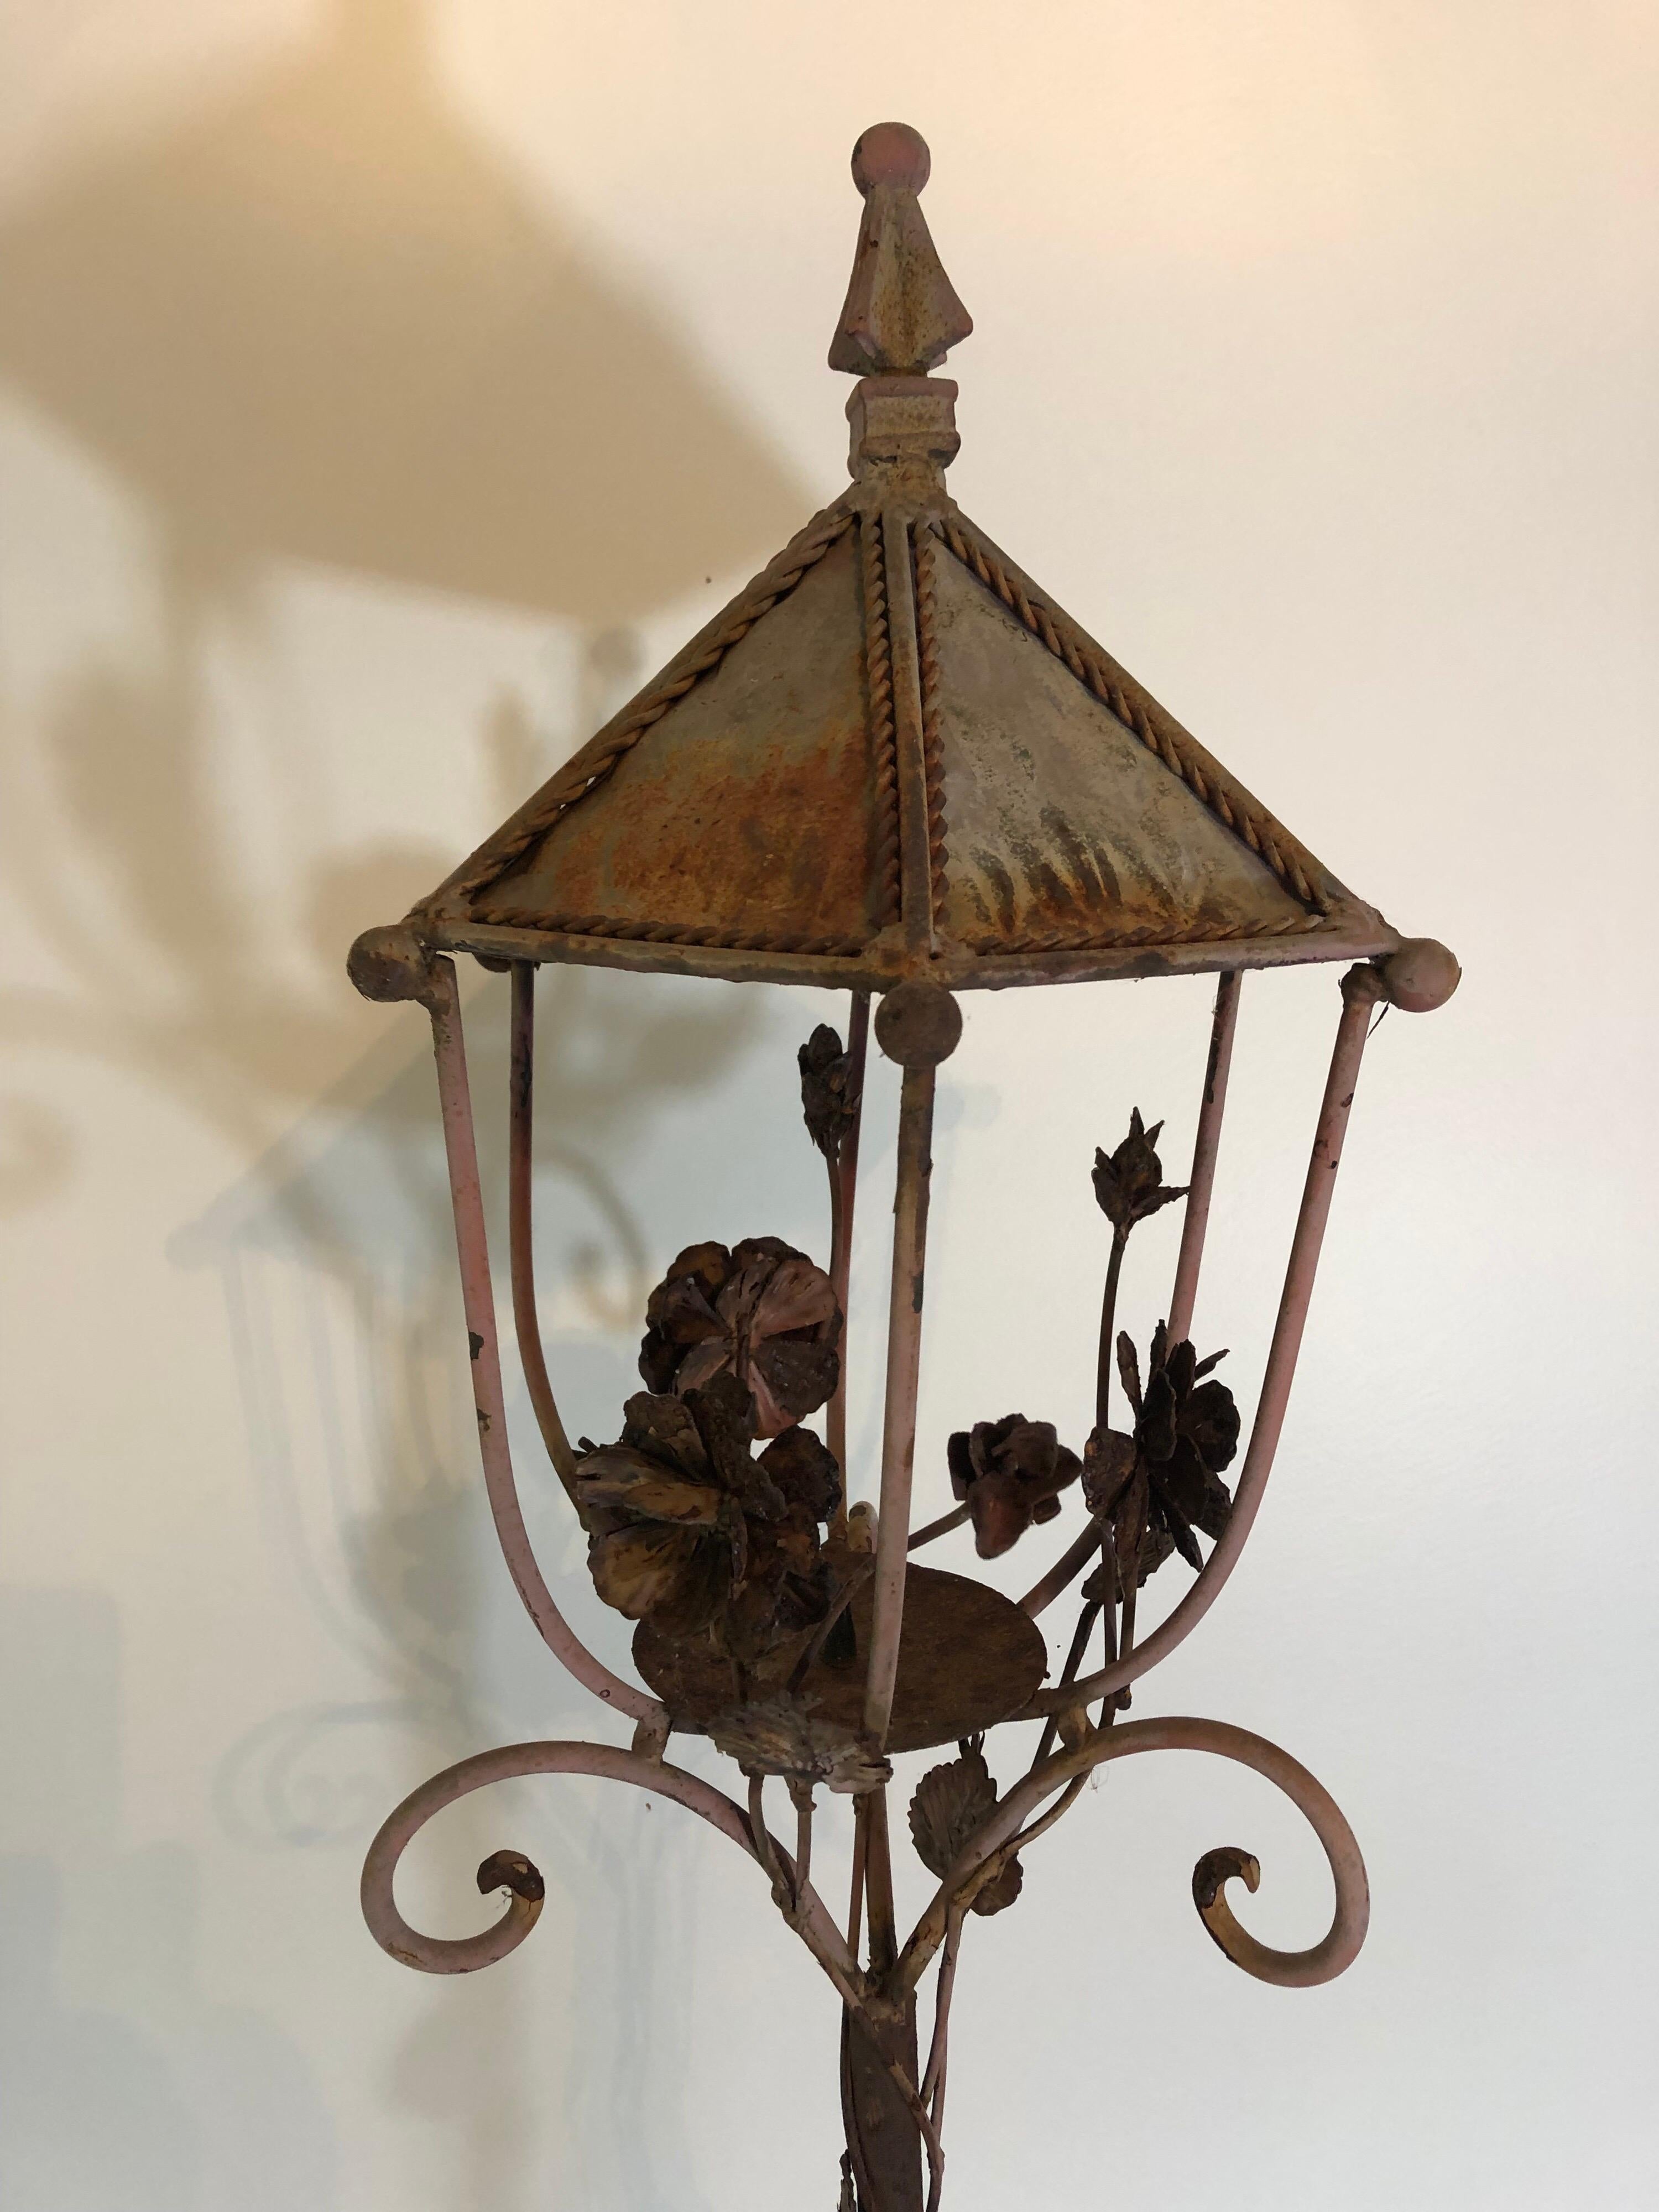 A vintage 1940s metal lantern with single candle pricket. Decorated flower motif with original patina.